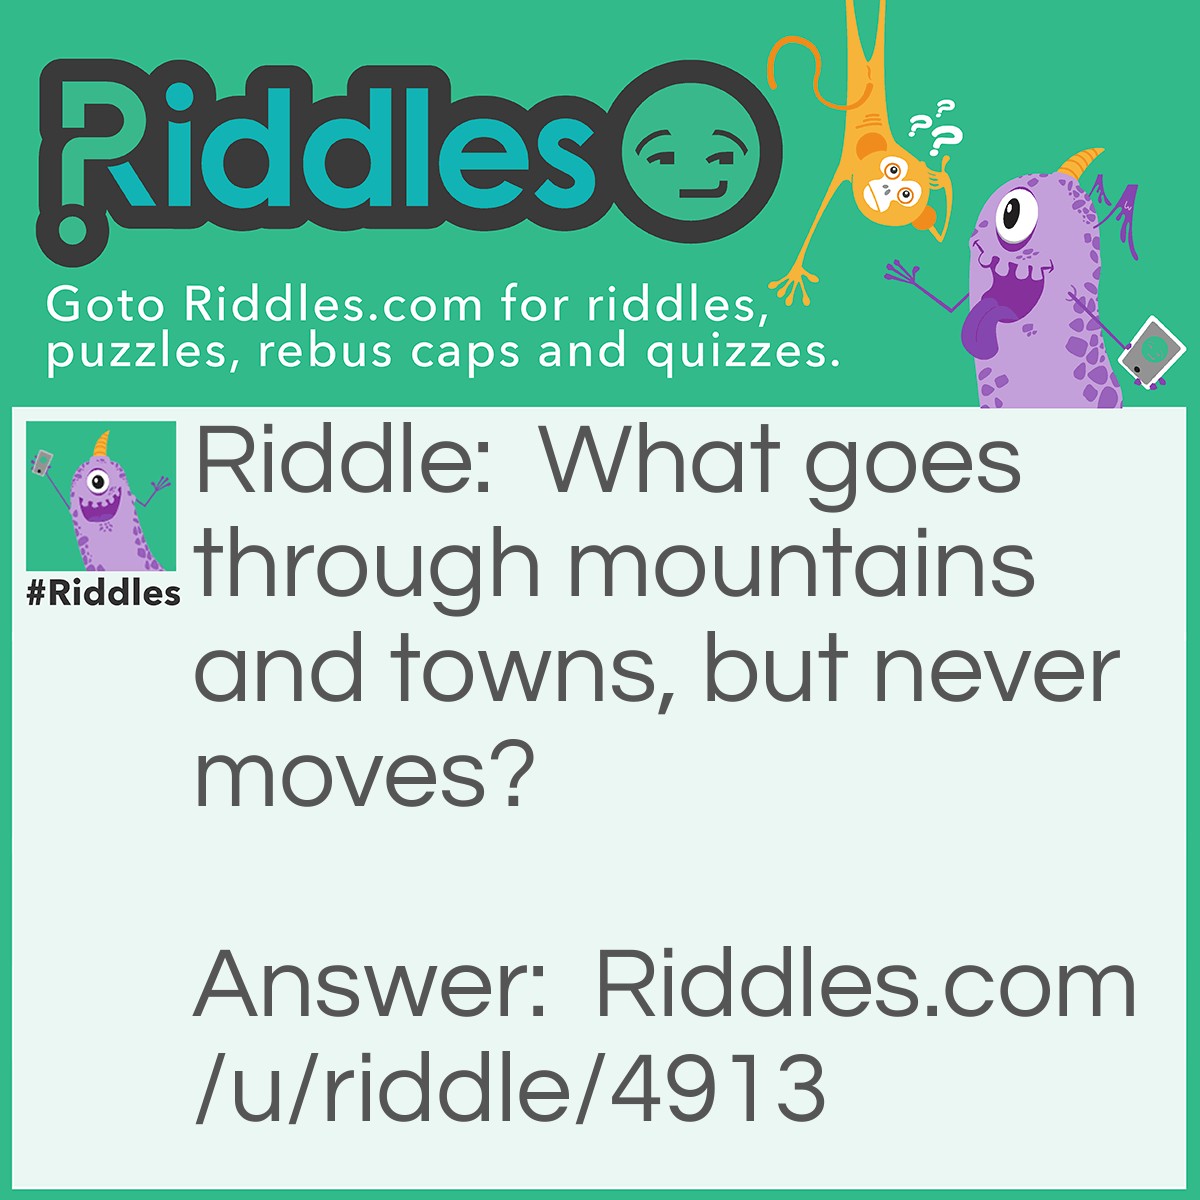 Riddle: What goes through mountains and towns, but never moves? Answer: Roads.